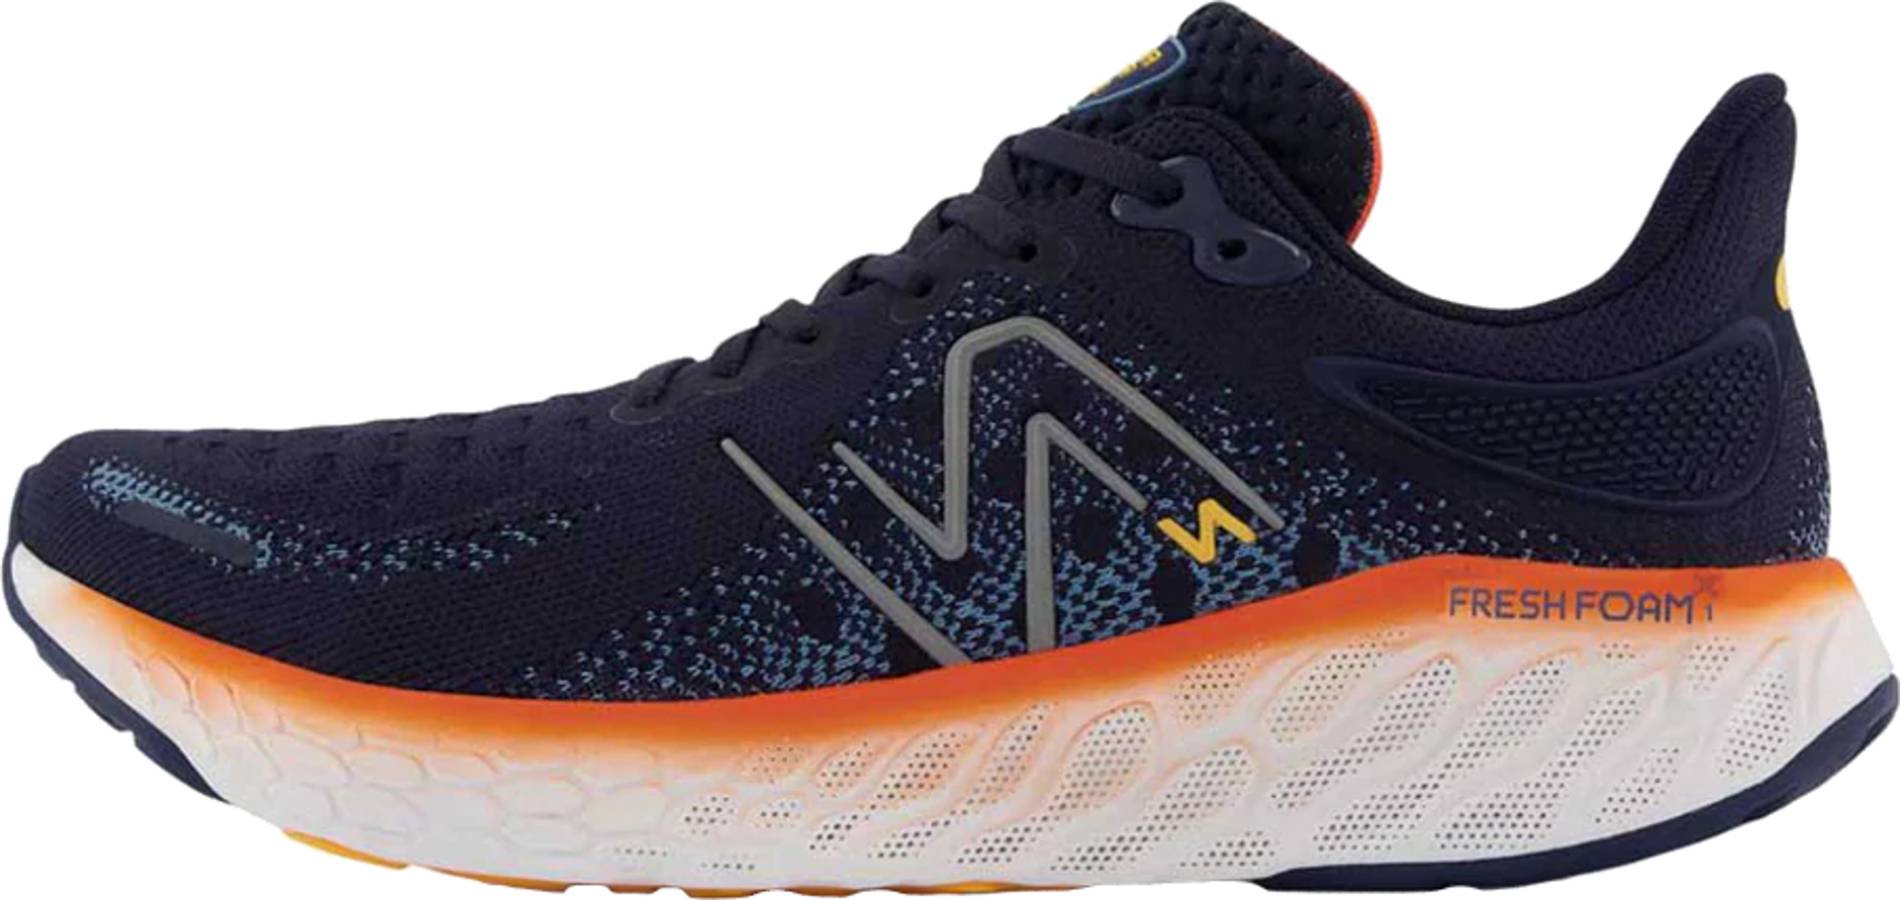 5 New Balance Fresh Foam 1080 running shoes: Save up to 33 